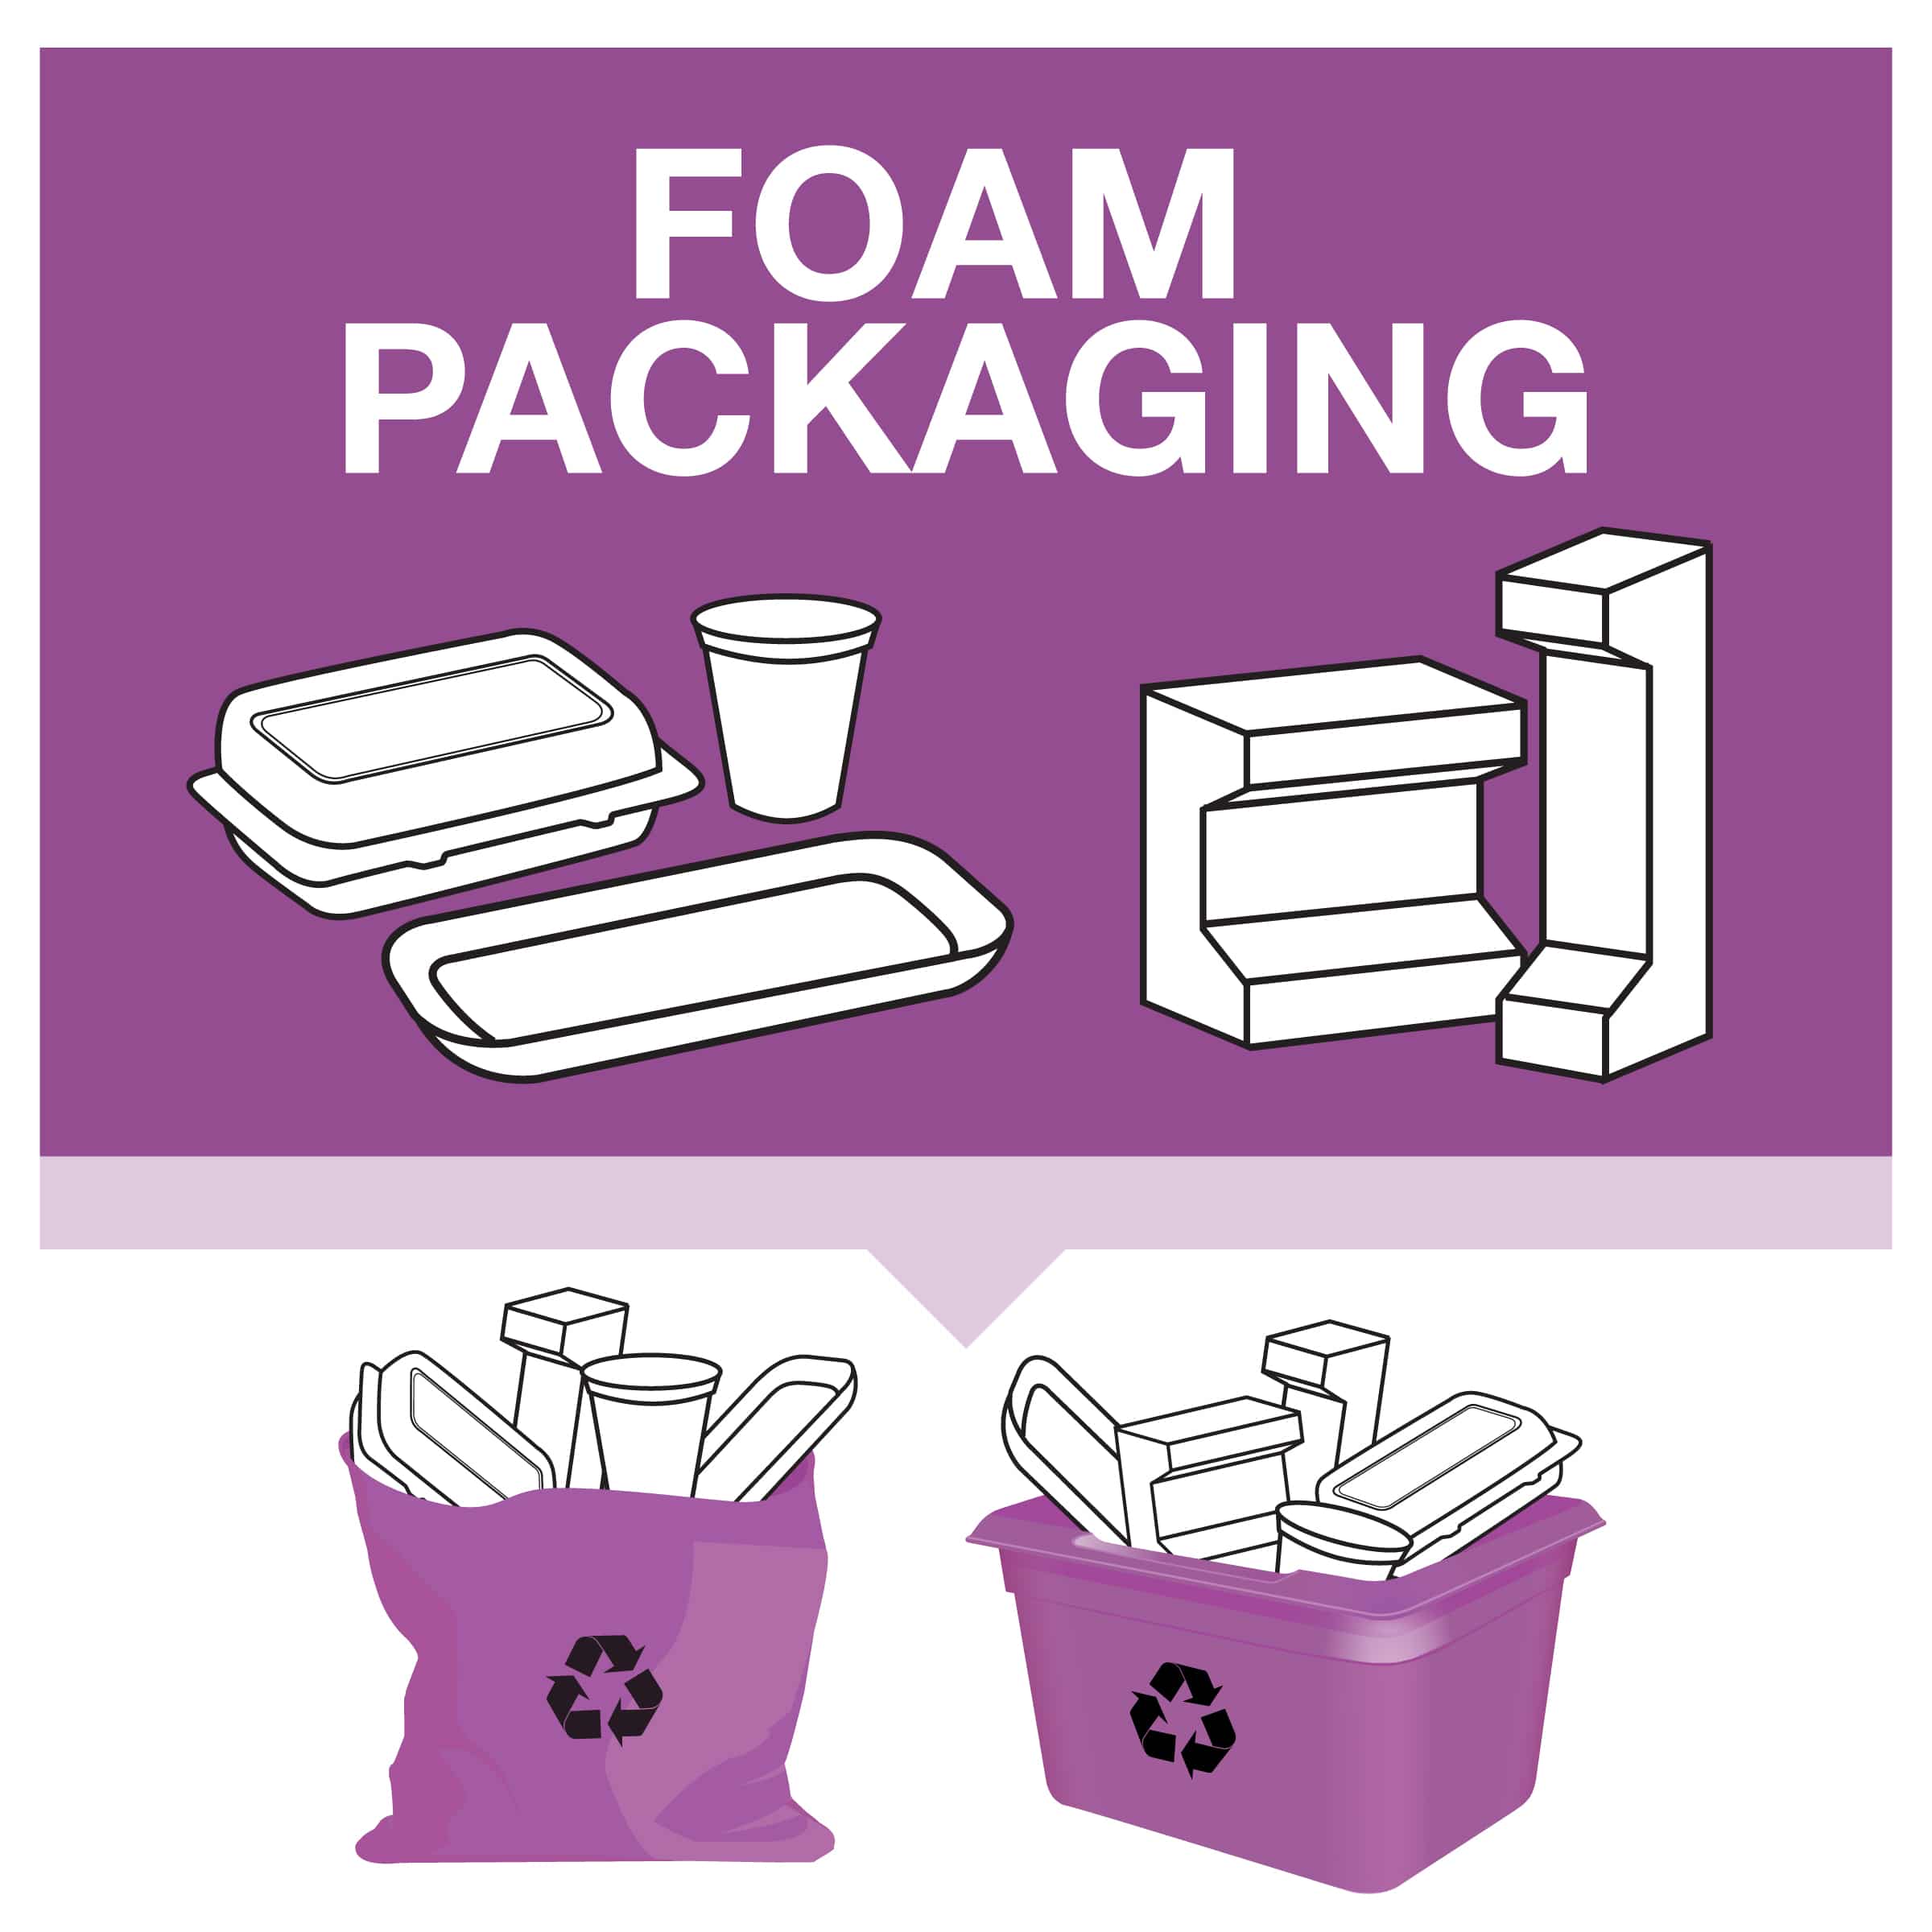 illustration of foam packaging accepted and the purple bag and box for collection